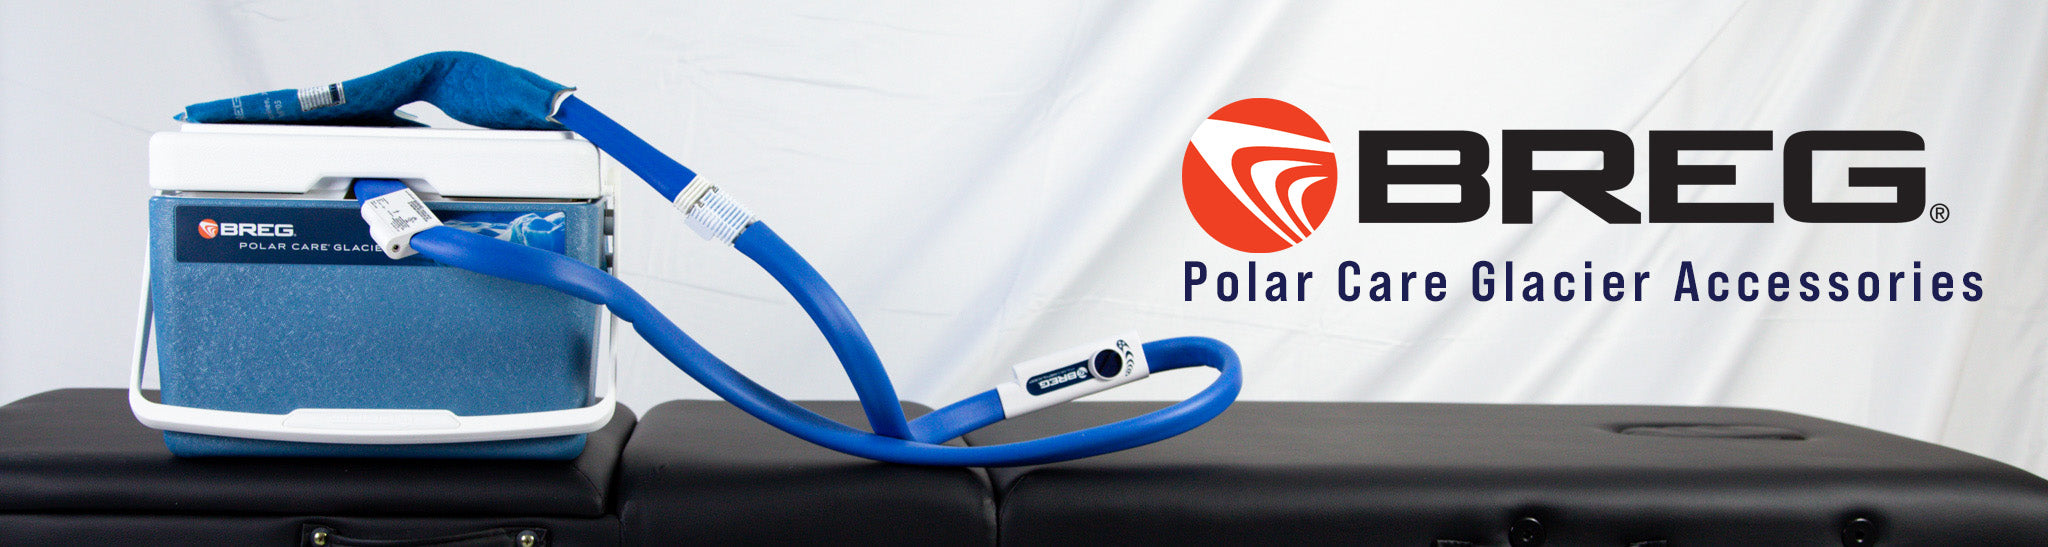 Breg Polar Care Glacier Accessories images by Supply Physical Therapy